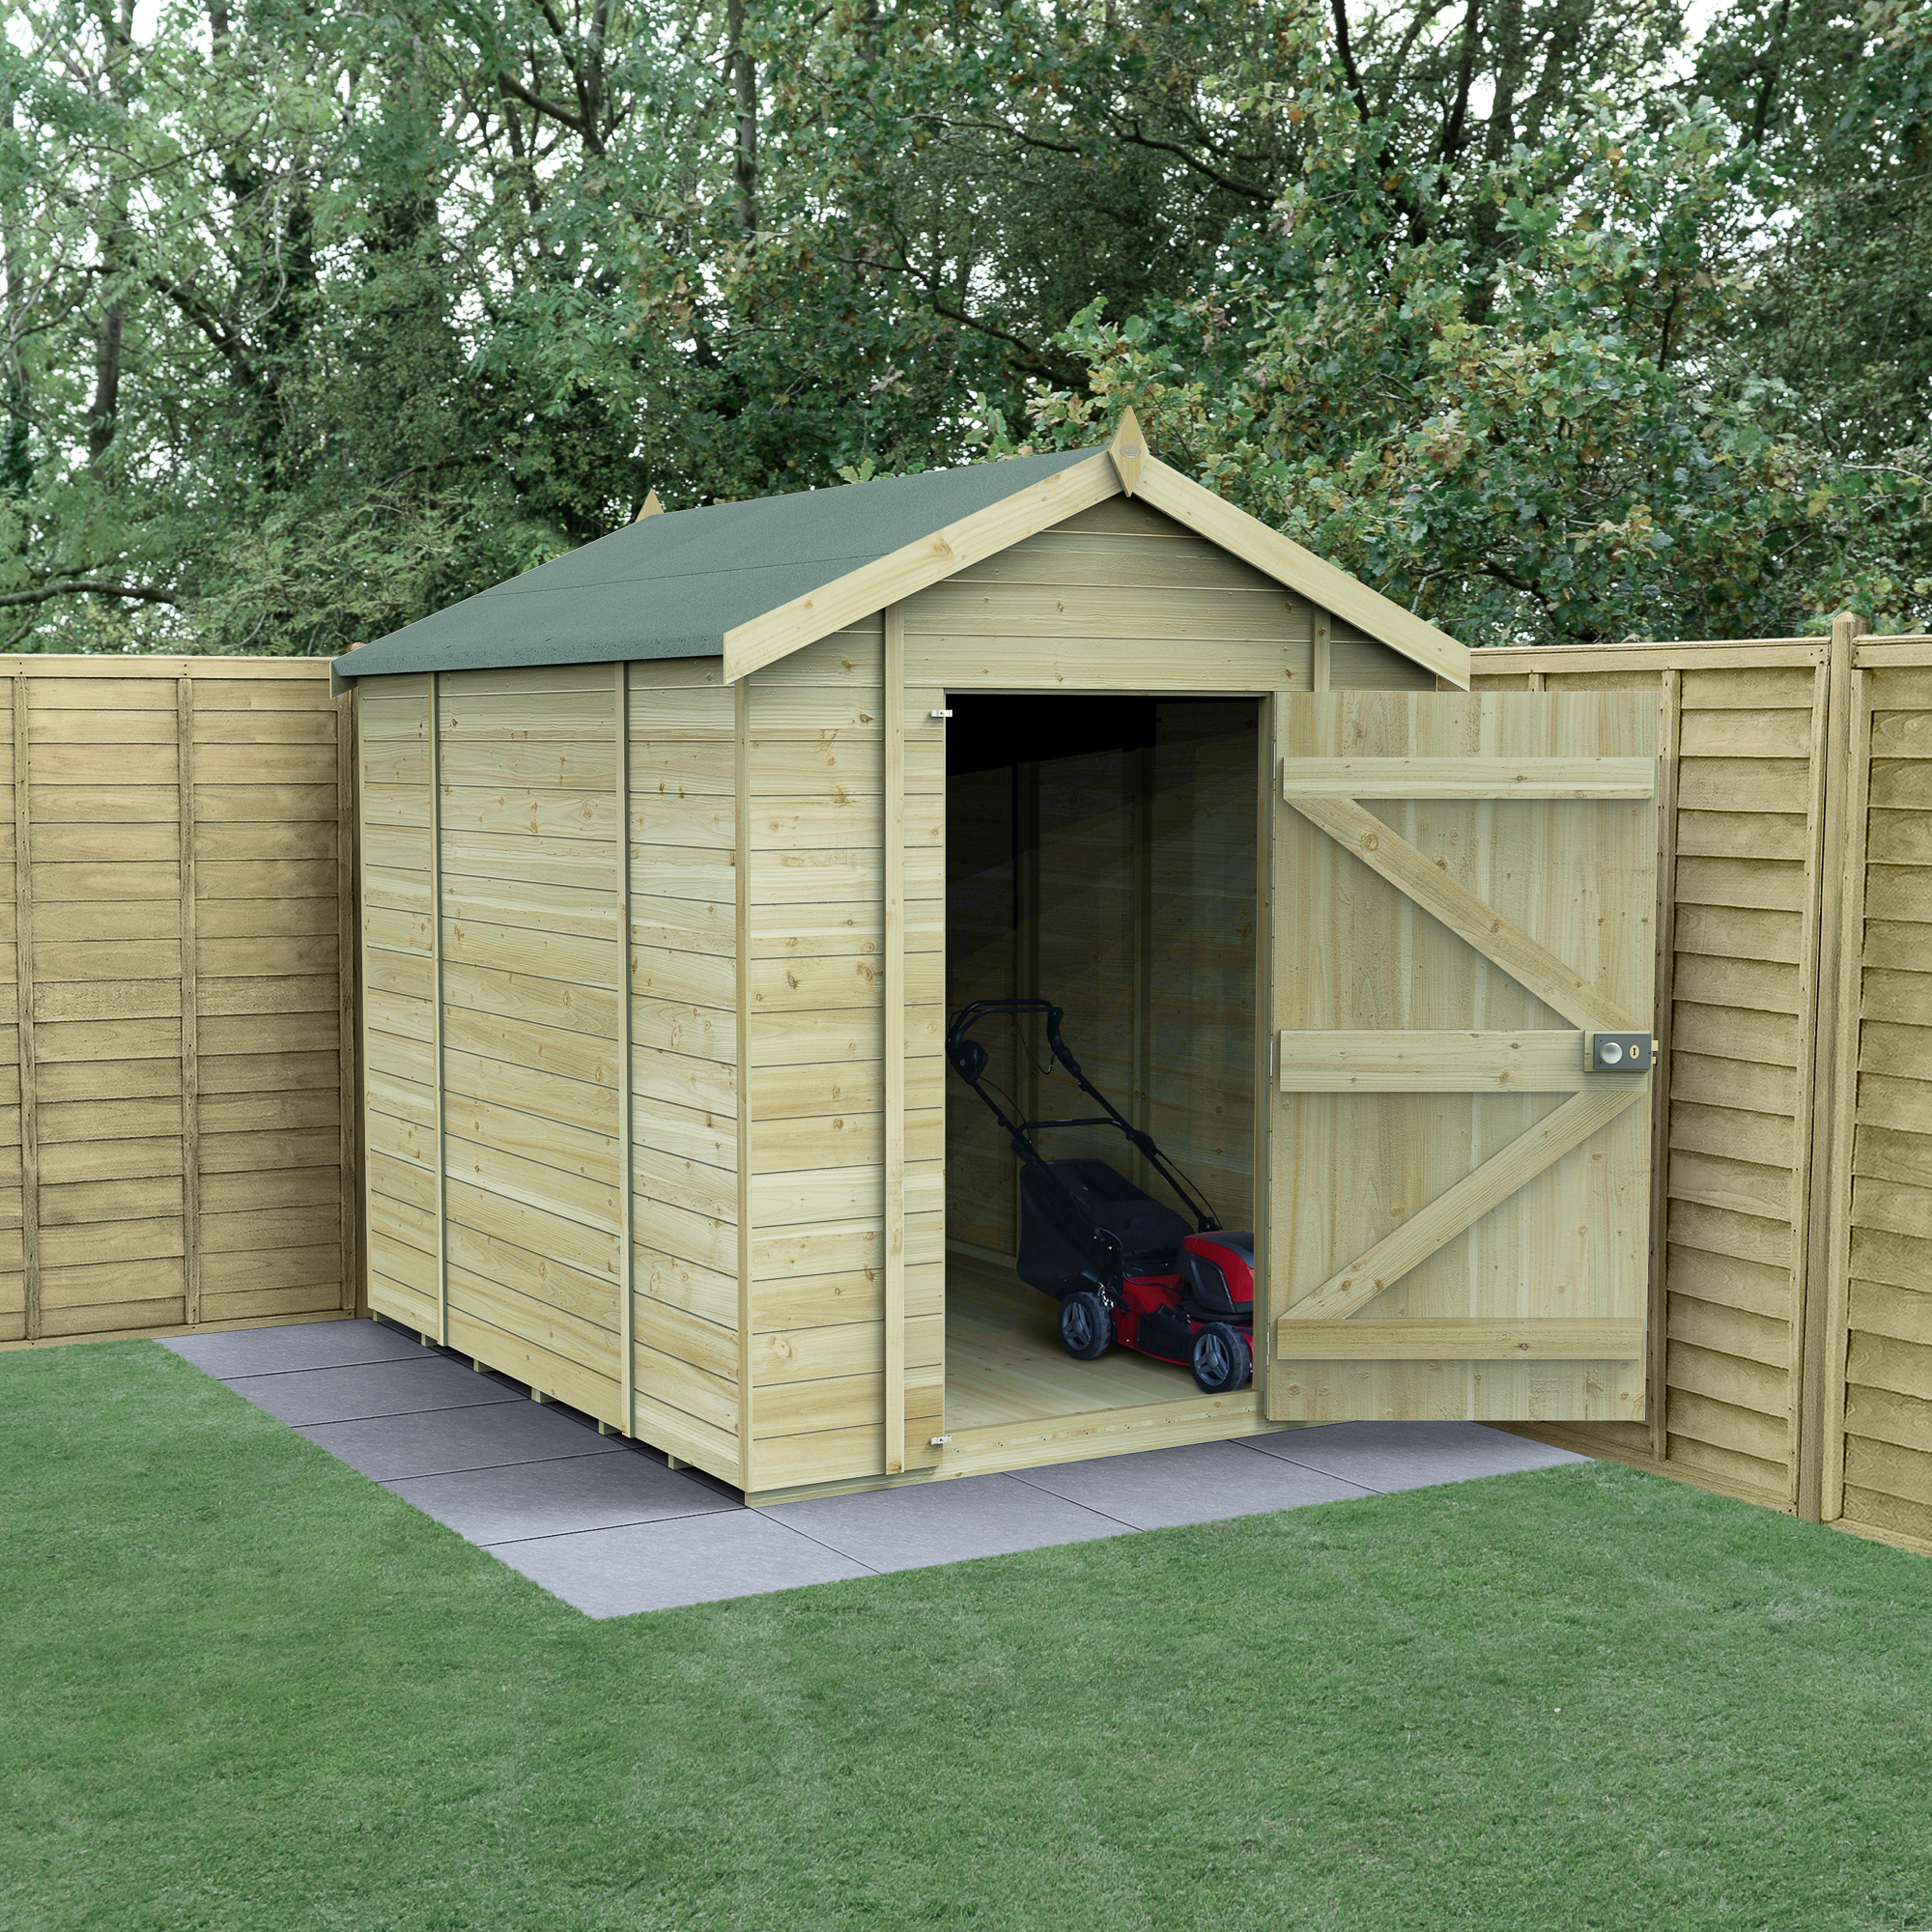 Forest Garden Timberdale 8 x 6ft Apex Tongue & Groove Pressure Treated Windowless Shed with Base